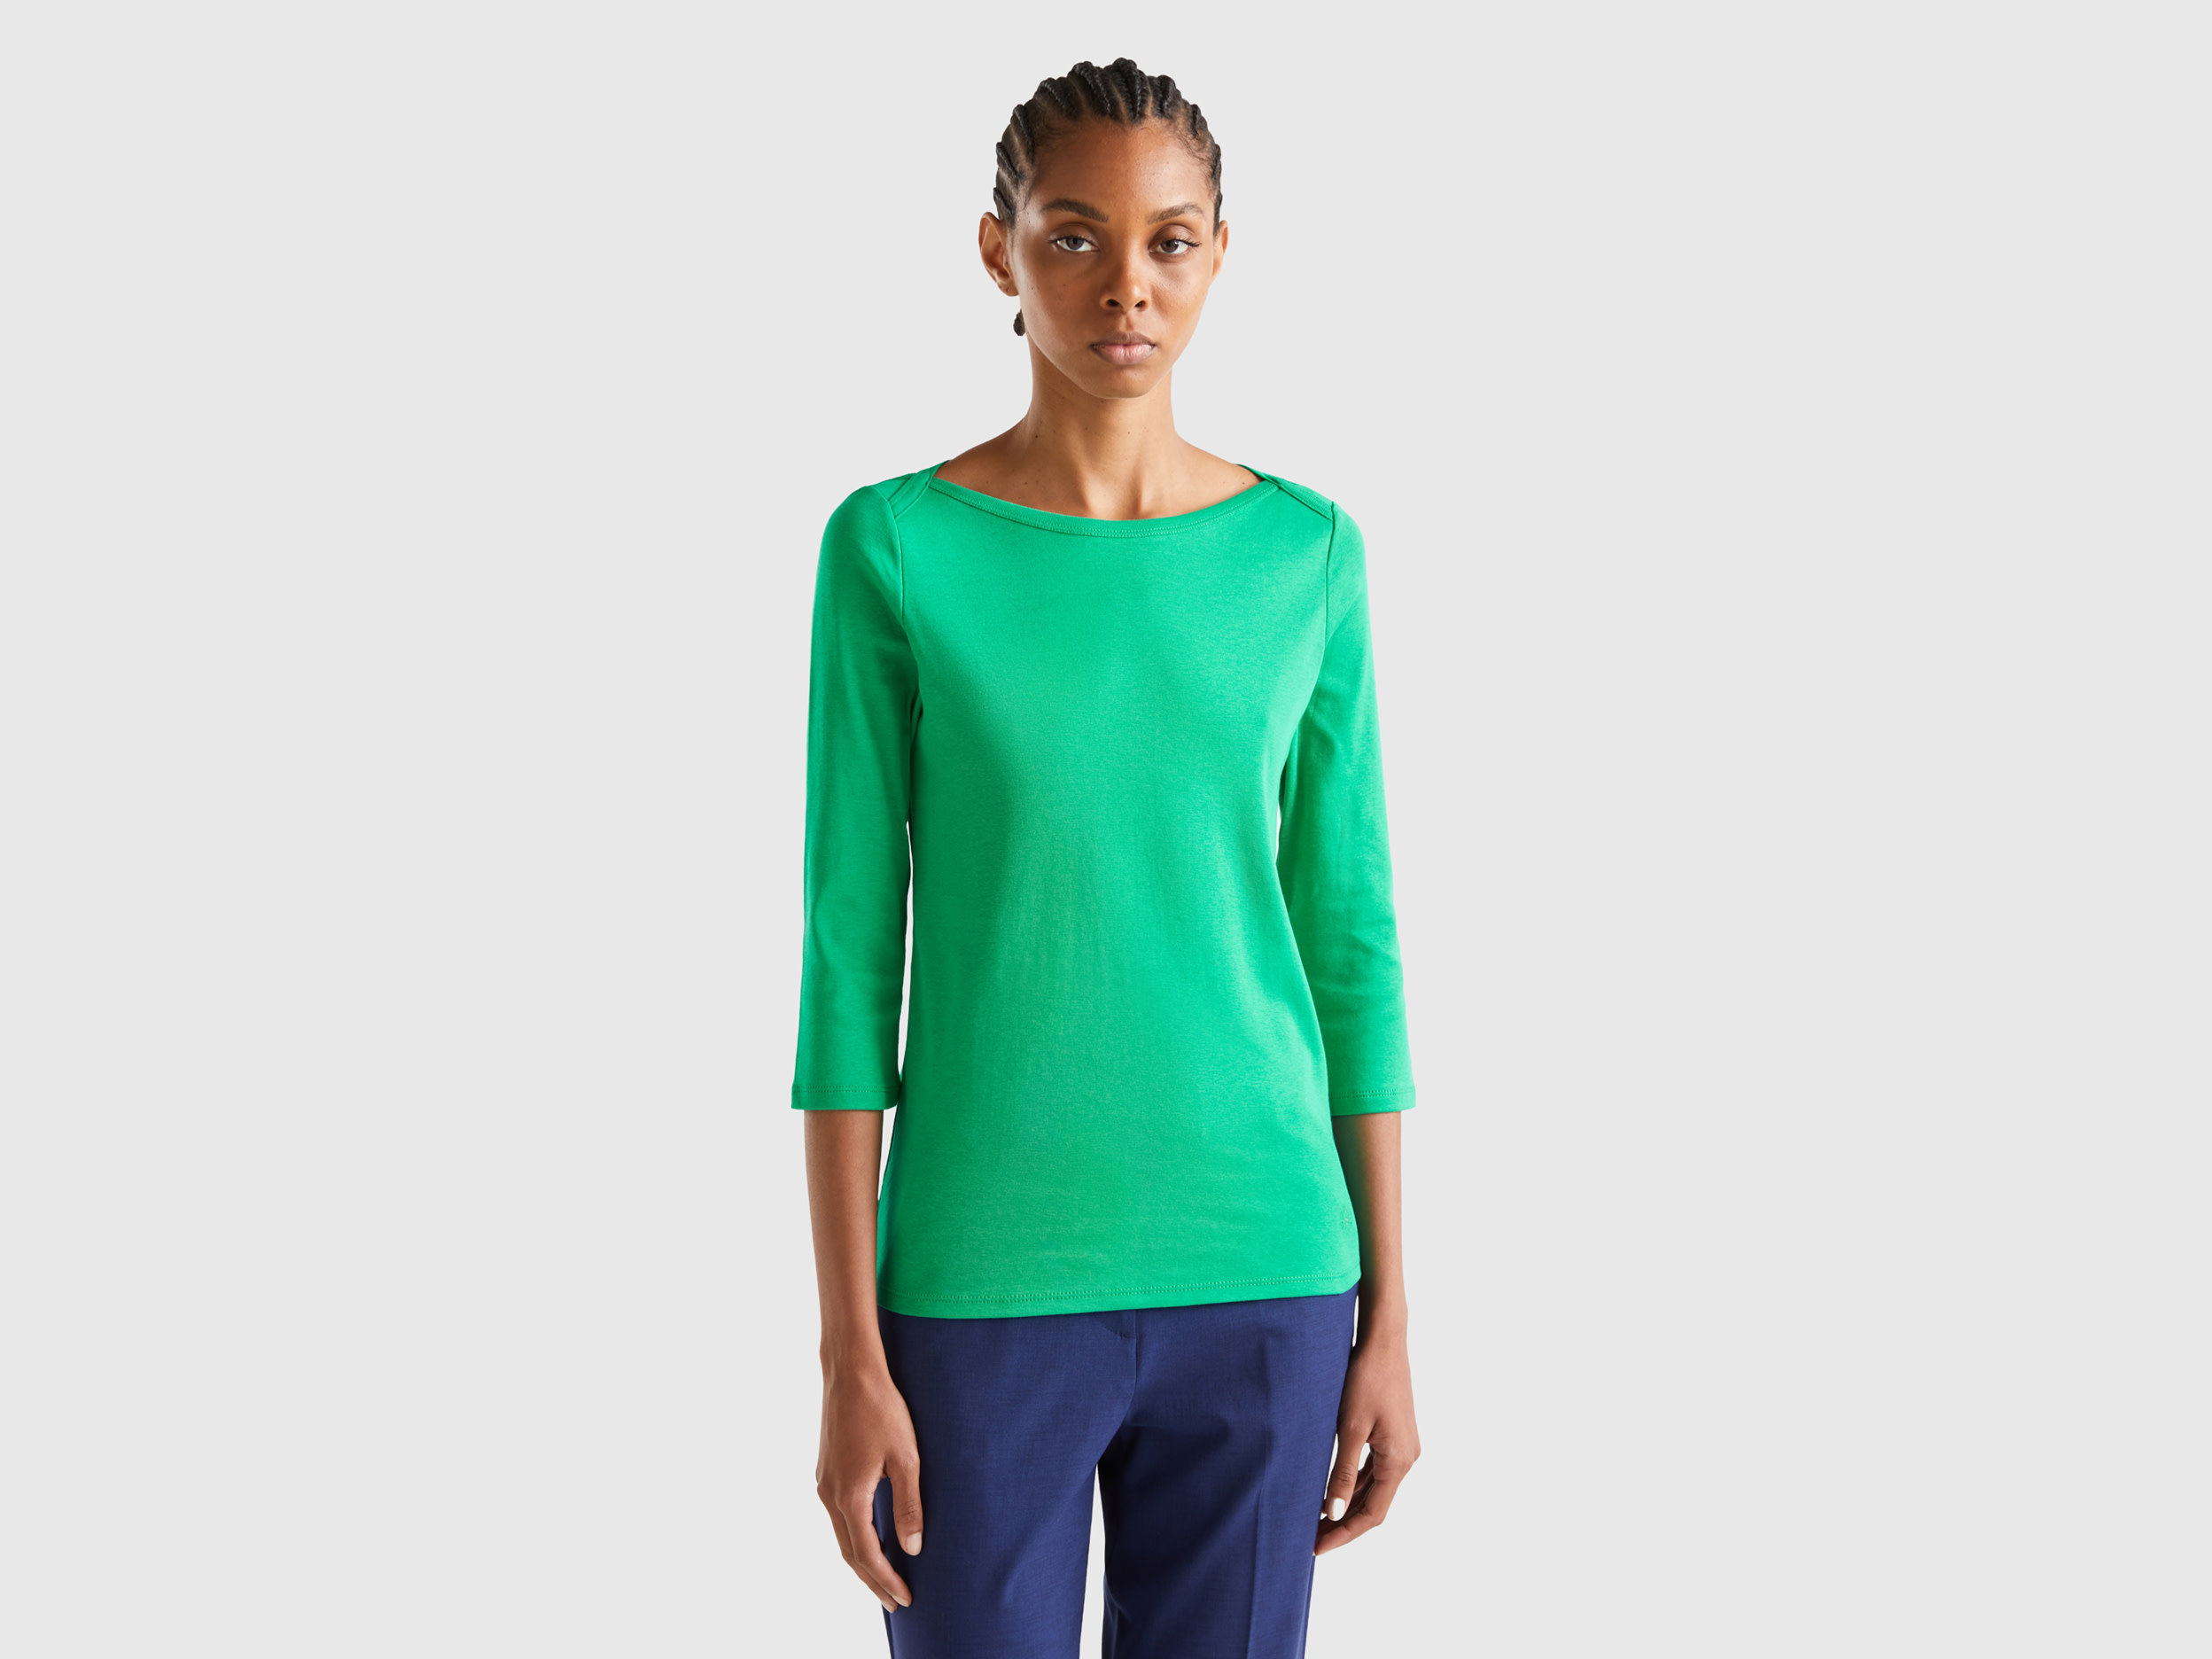 Benetton, T-shirt With Boat Neck In 100% Cotton, size XS, Green, Women